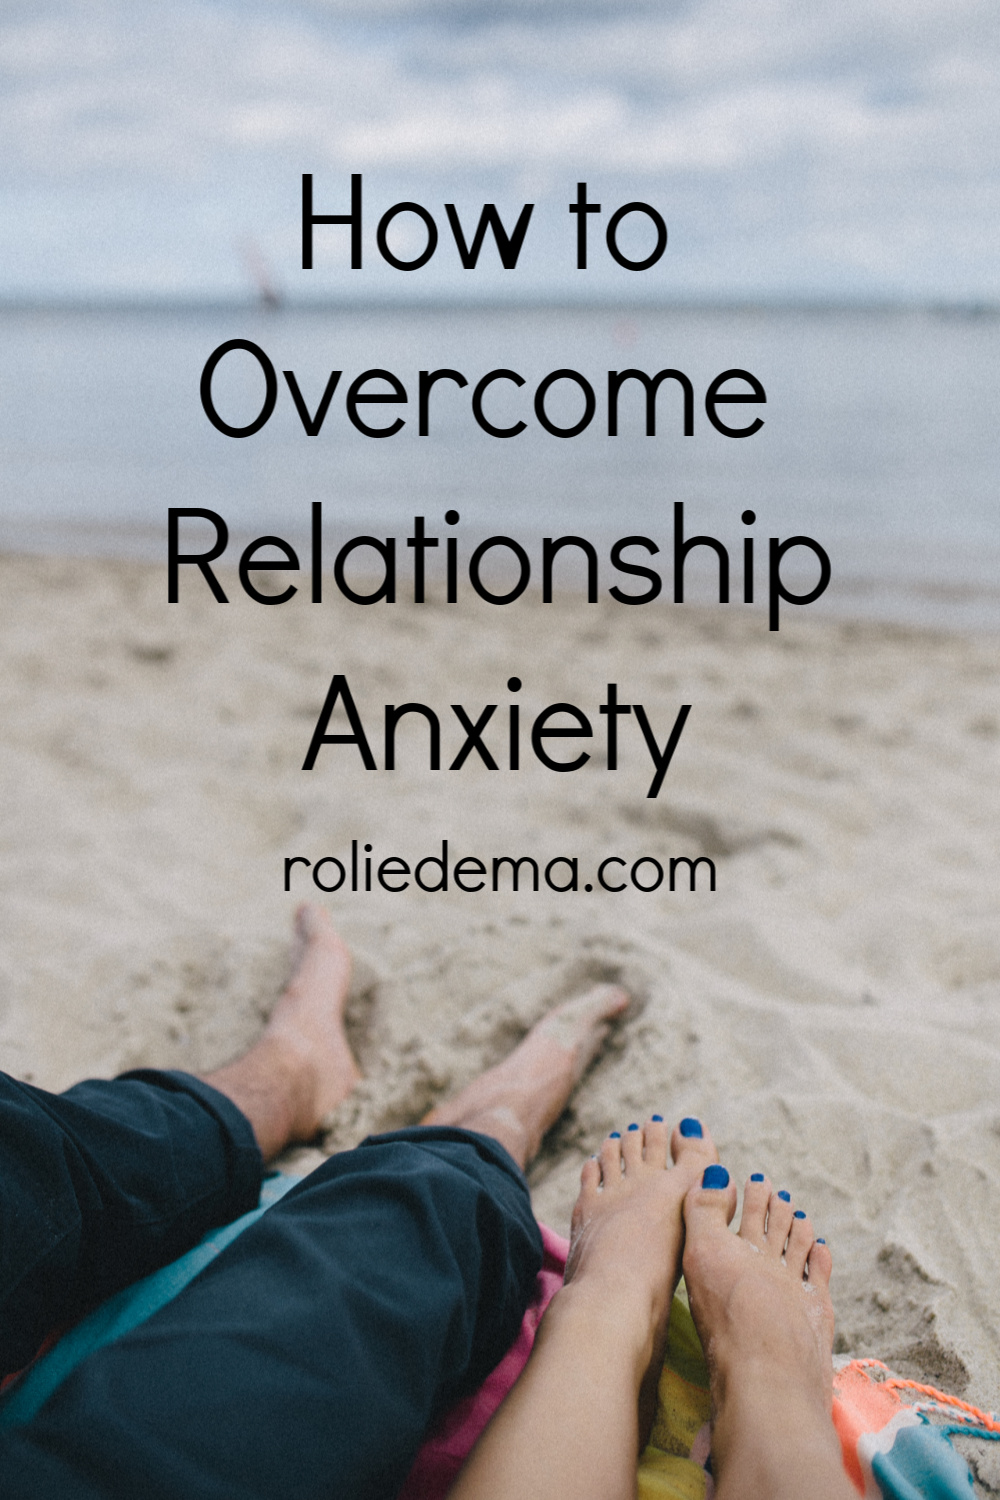 Relationship Anxiety - Why it Arises & How to Overcome It